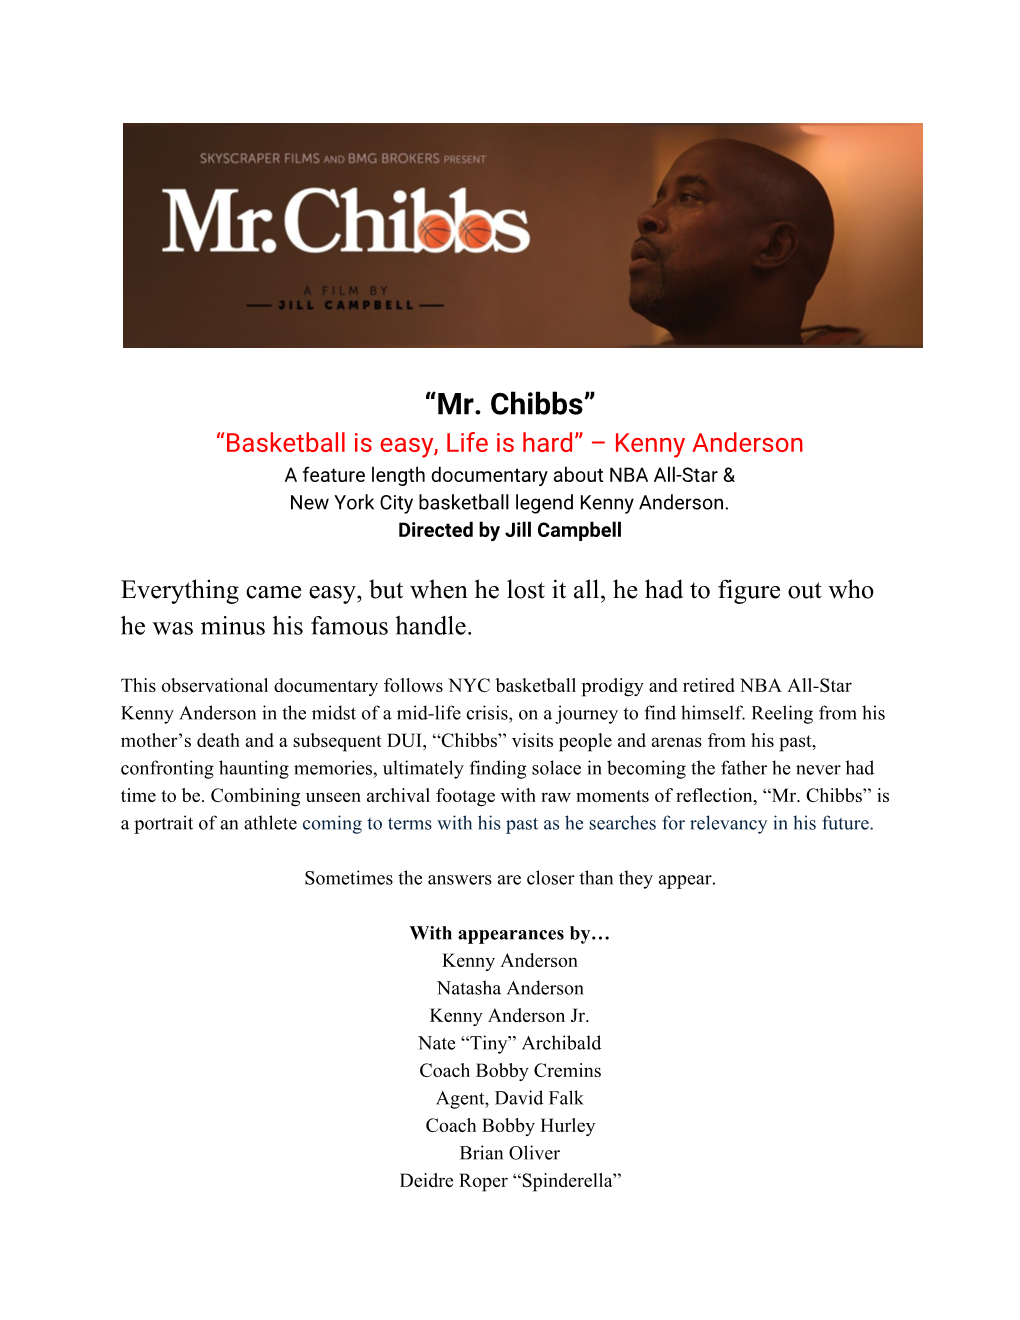 “Mr. Chibbs” “Basketball Is Easy, Life Is Hard” – Kenny Anderson a Feature Length Documentary About NBA All-Star & New York City Basketball Legend Kenny Anderson